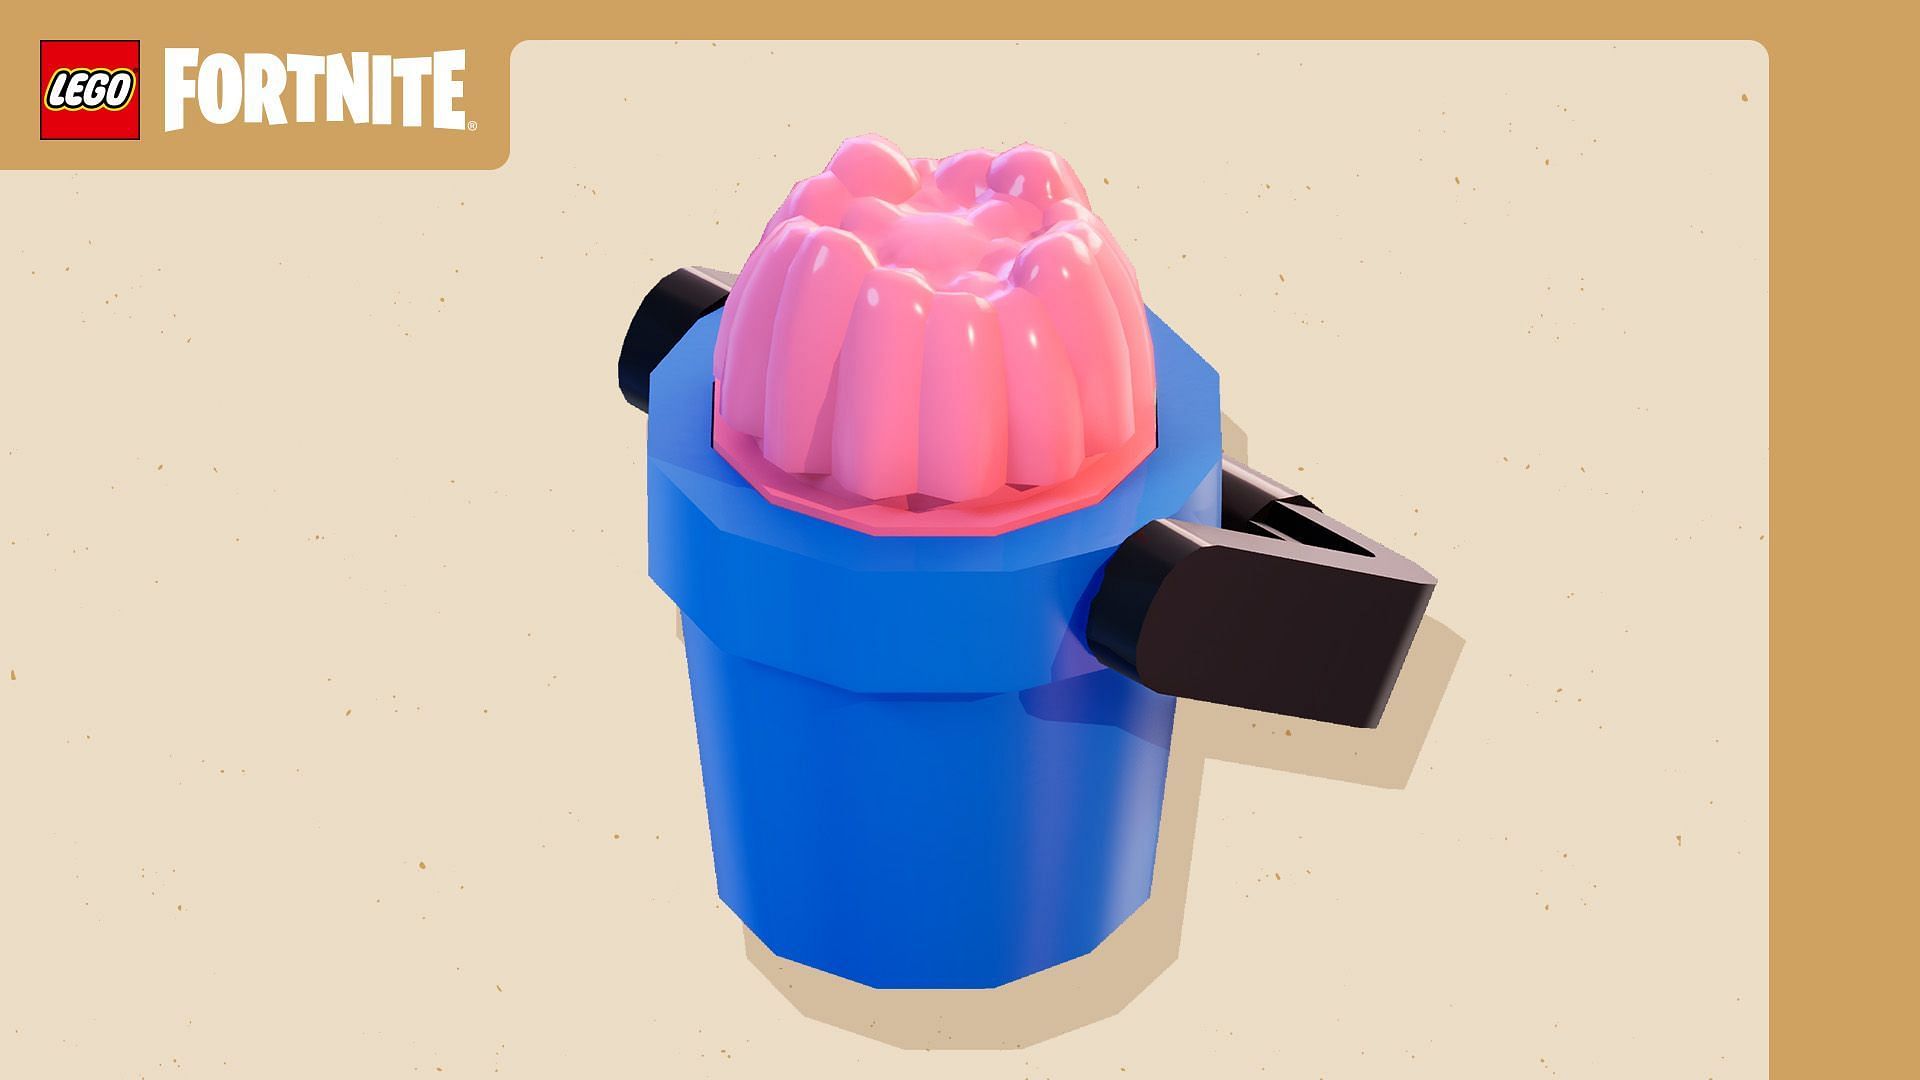 Bait Bucket is used to attract more fish in LEGO Fortnite (Image via Epic Games)